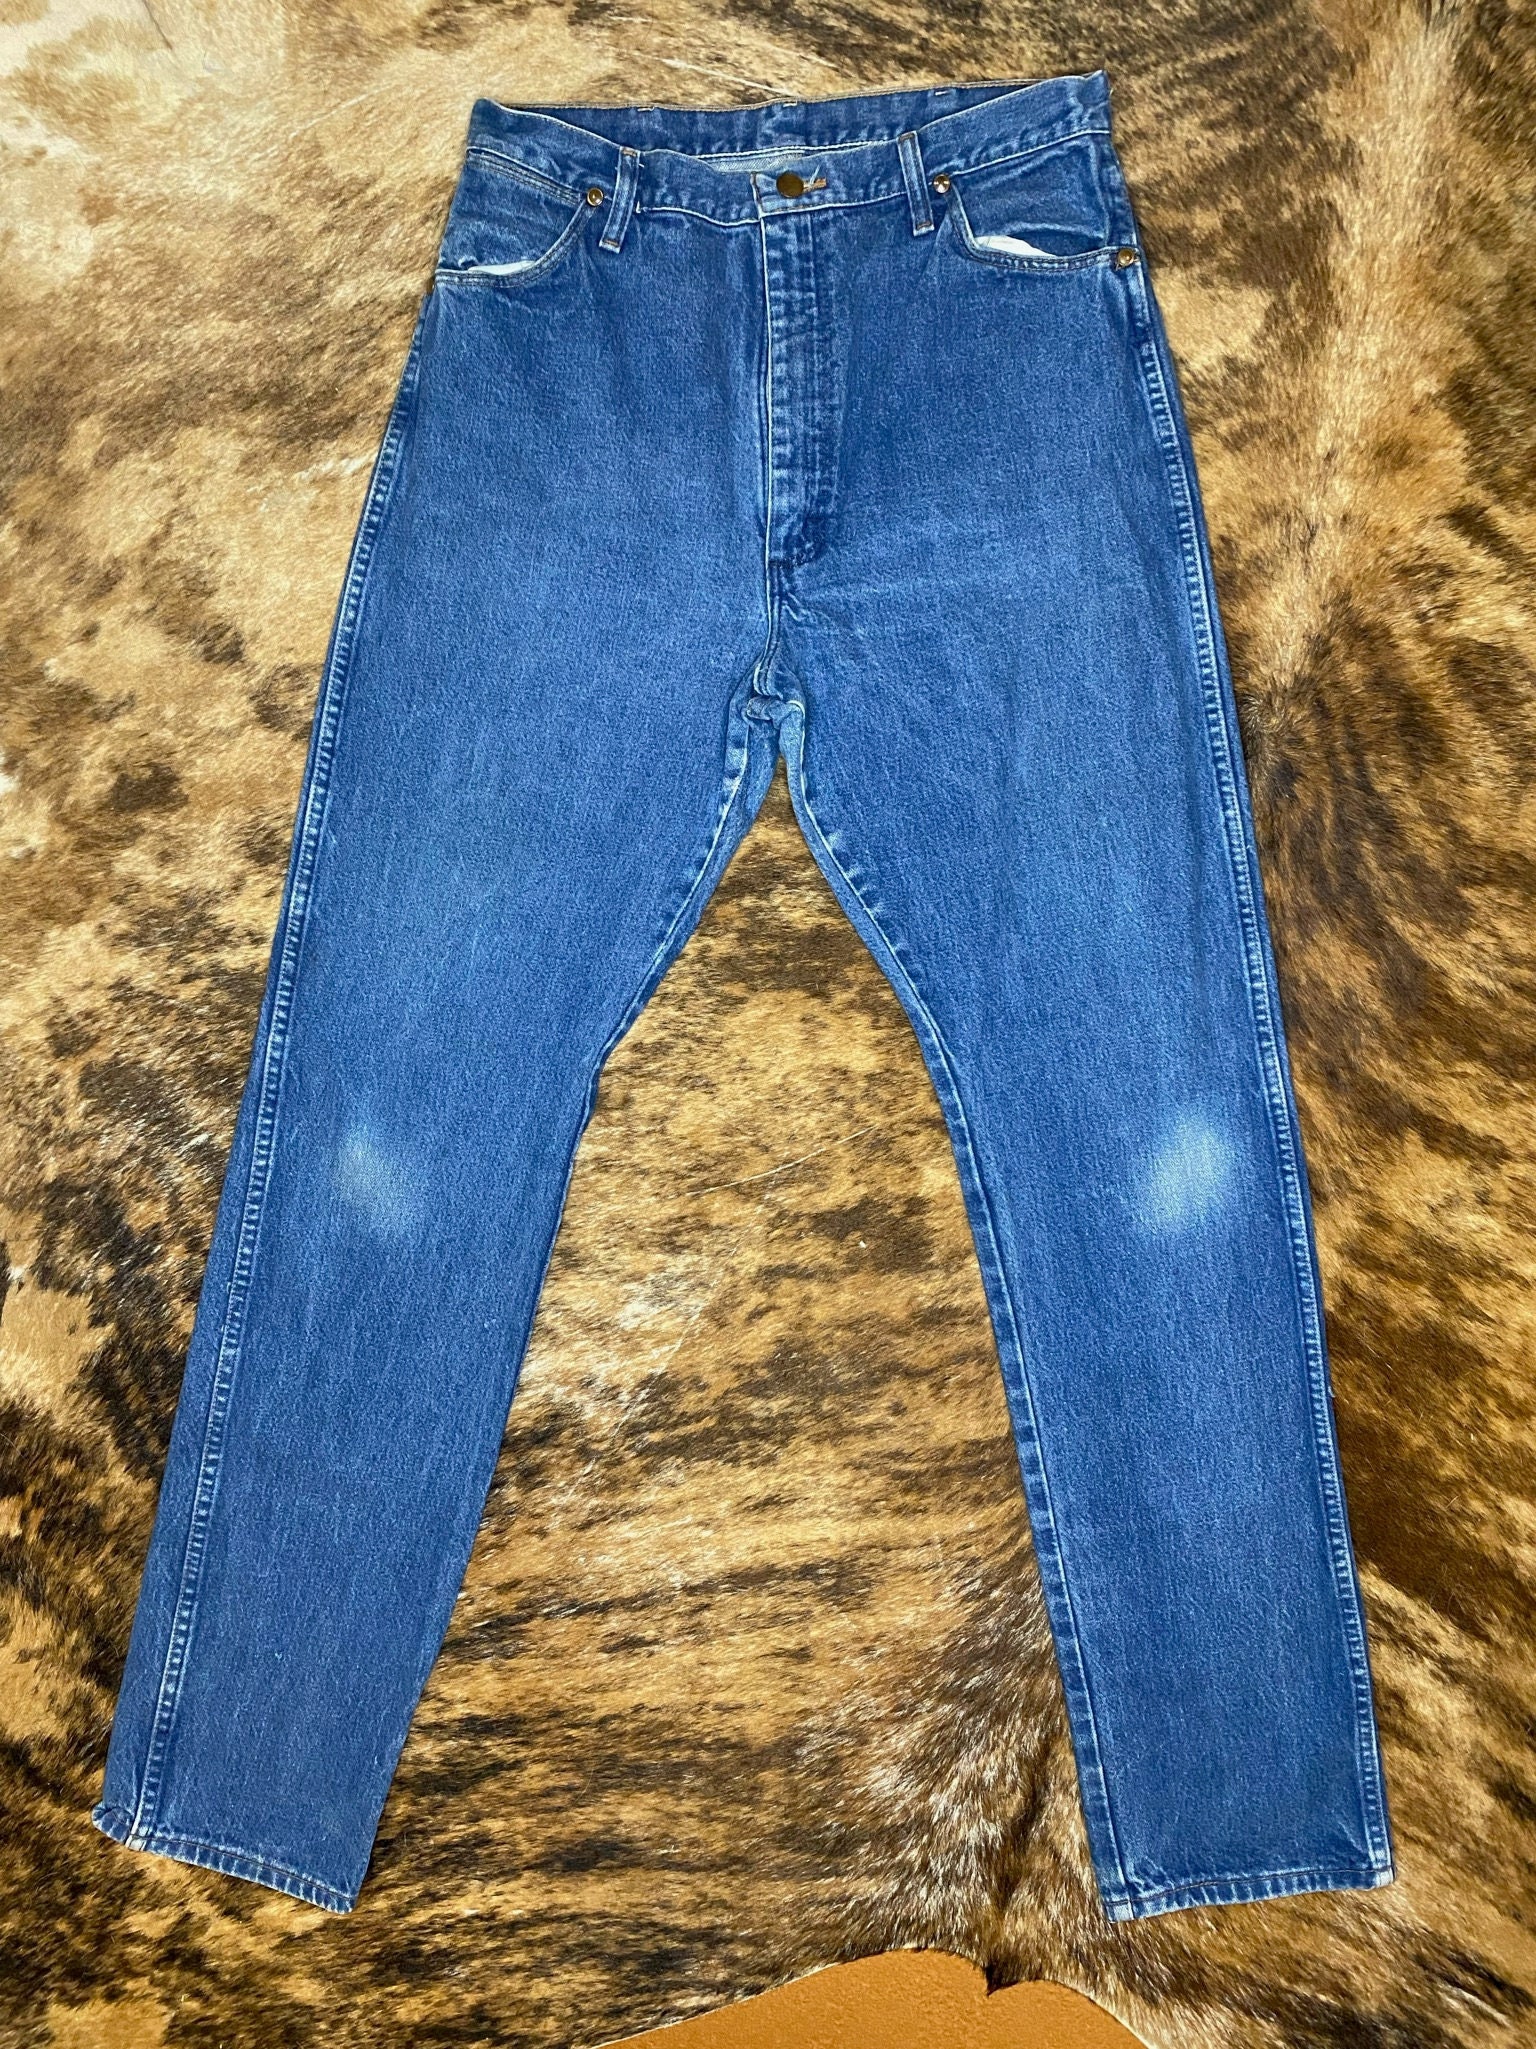 Vintage 32x34 Wrangler Jeans Made in USA - Etsy